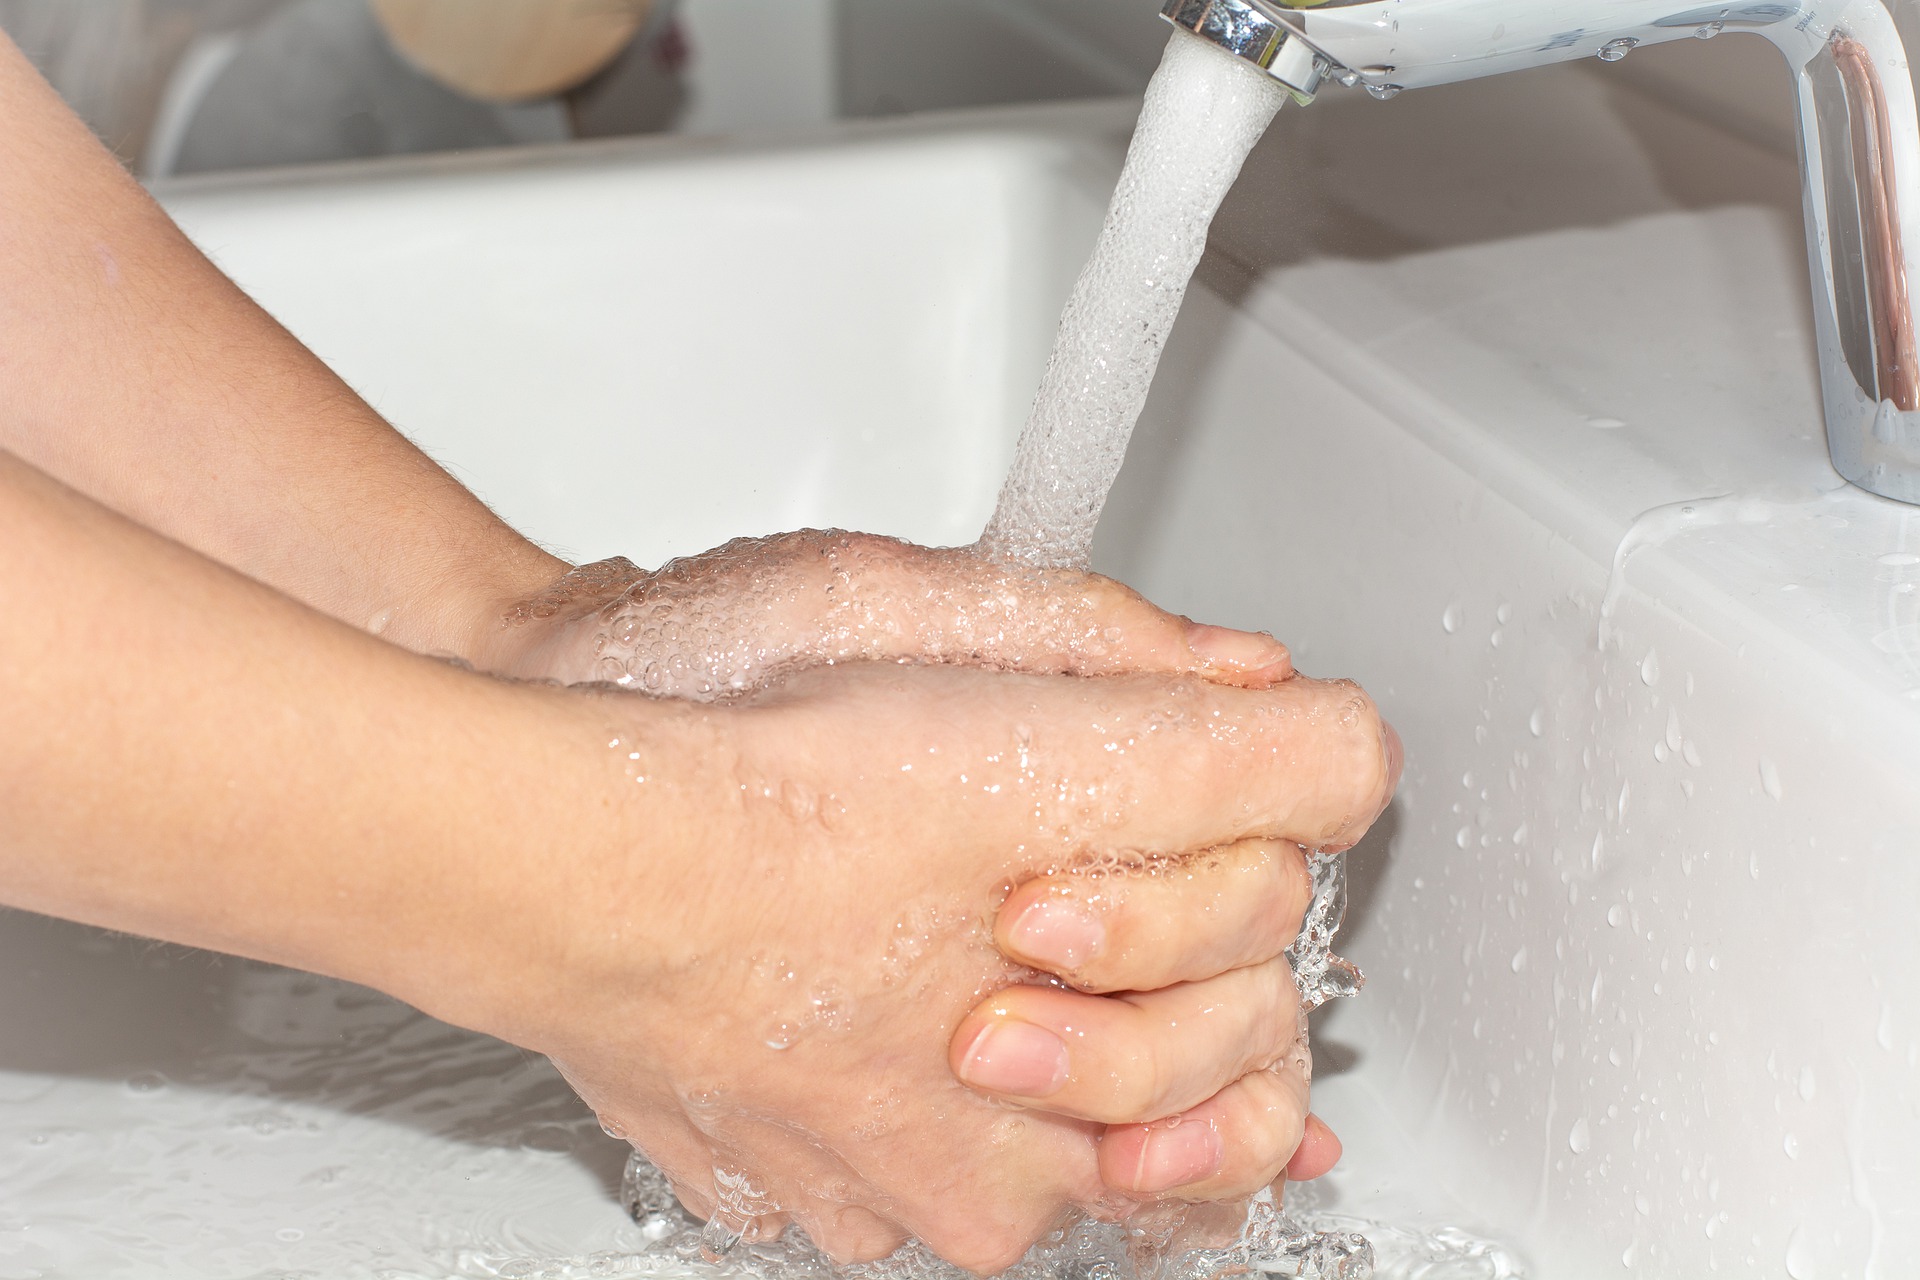 Washing hands for wound care